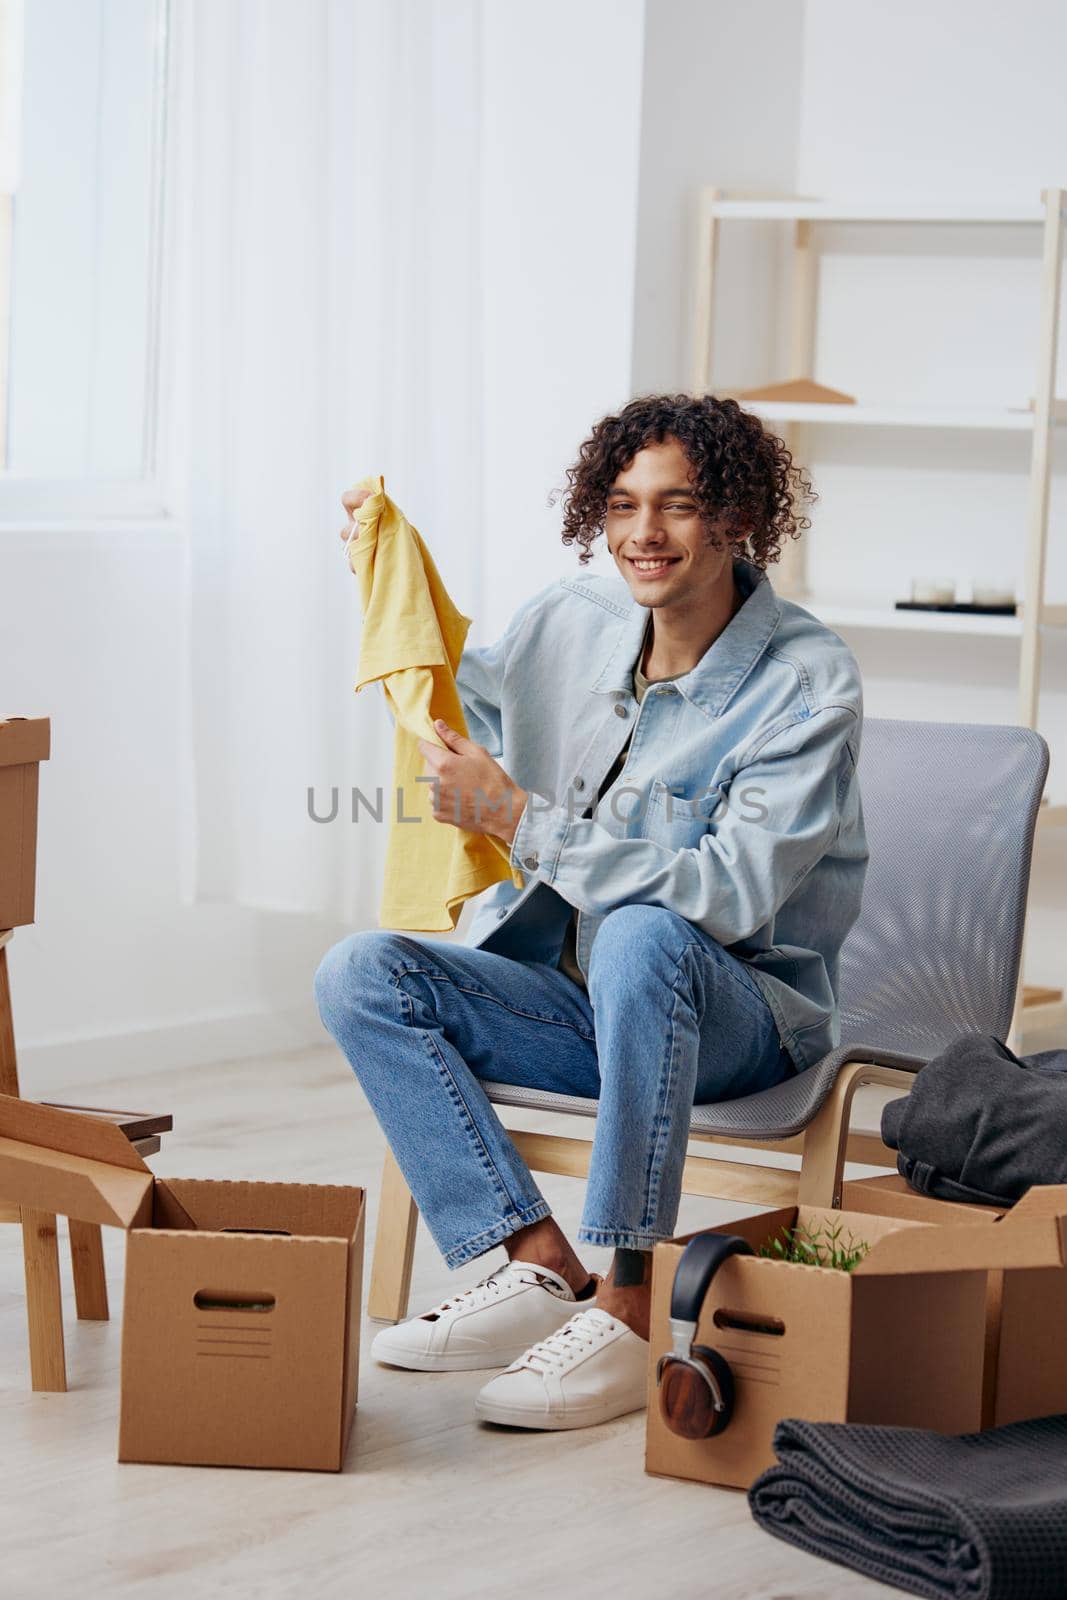 A young man sitting on a chair with boxes interior moving. High quality photo